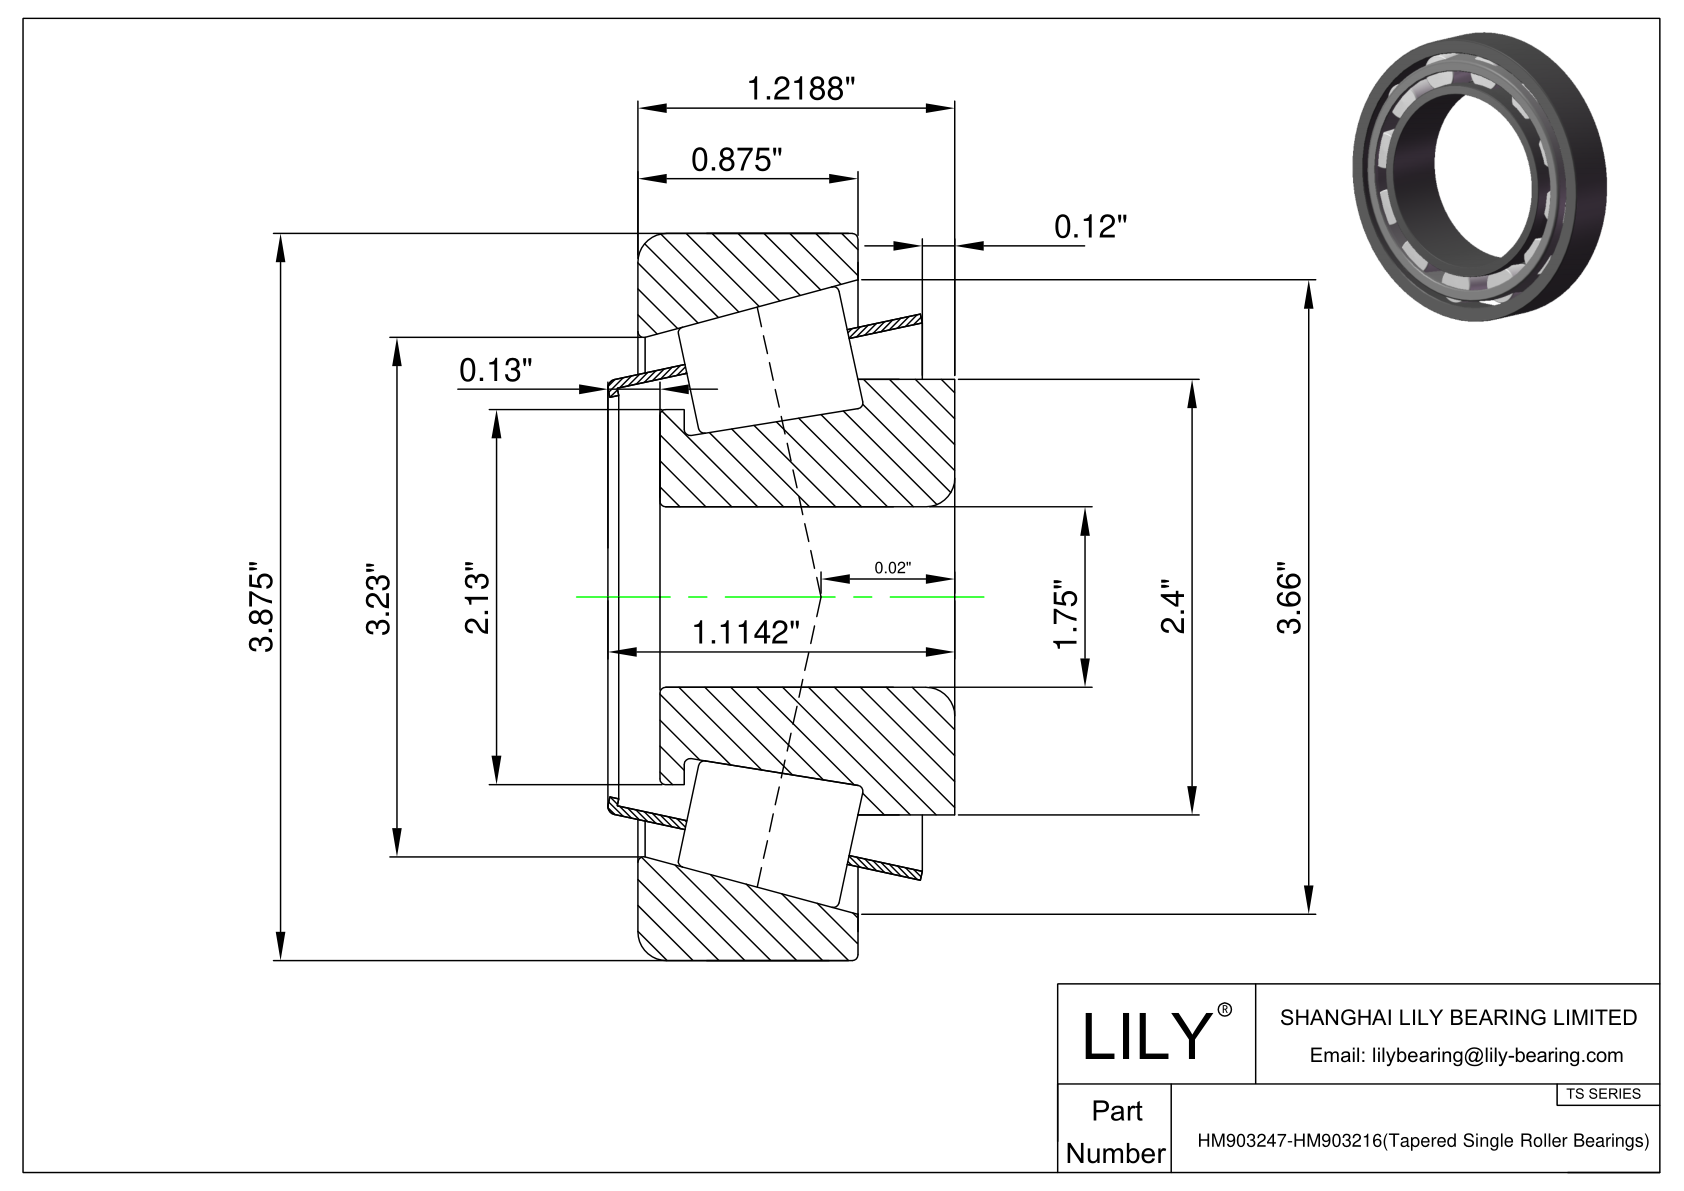 HM903247-HM903216 TS (Tapered Single Roller Bearings) (Imperial) cad drawing